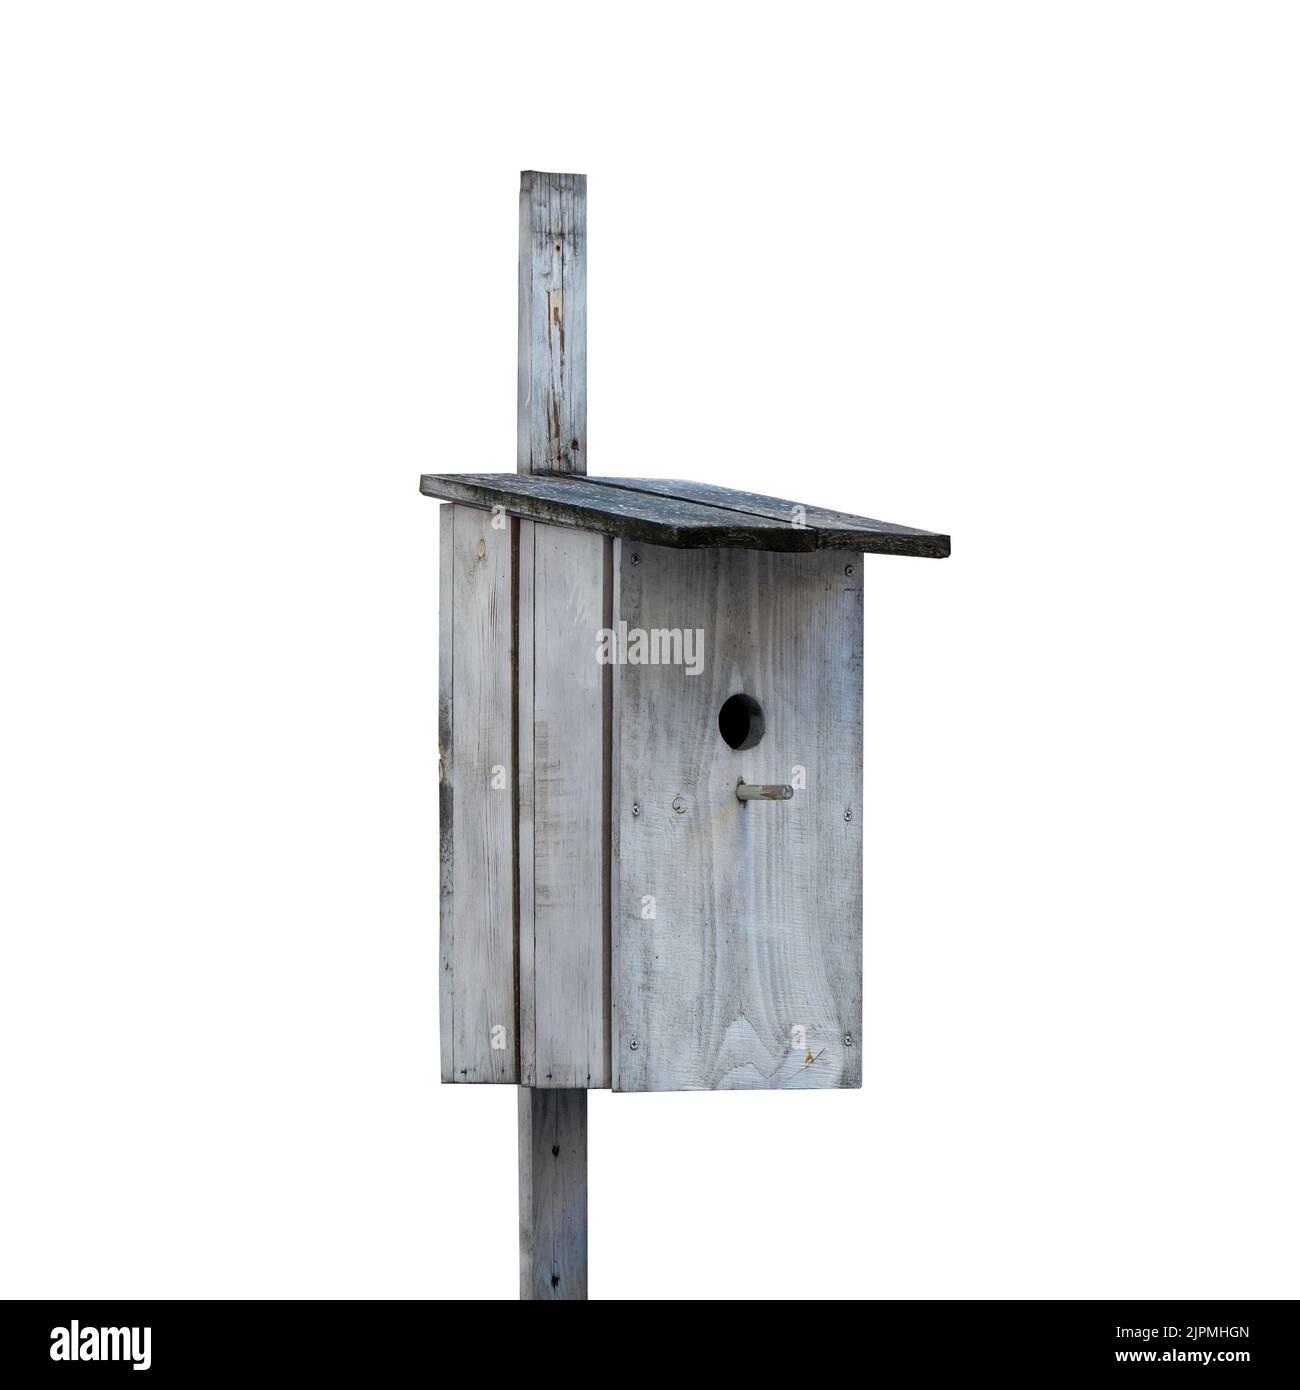 Wooden old birdhouse for small birds. Isolated on a white background. Stock Photo